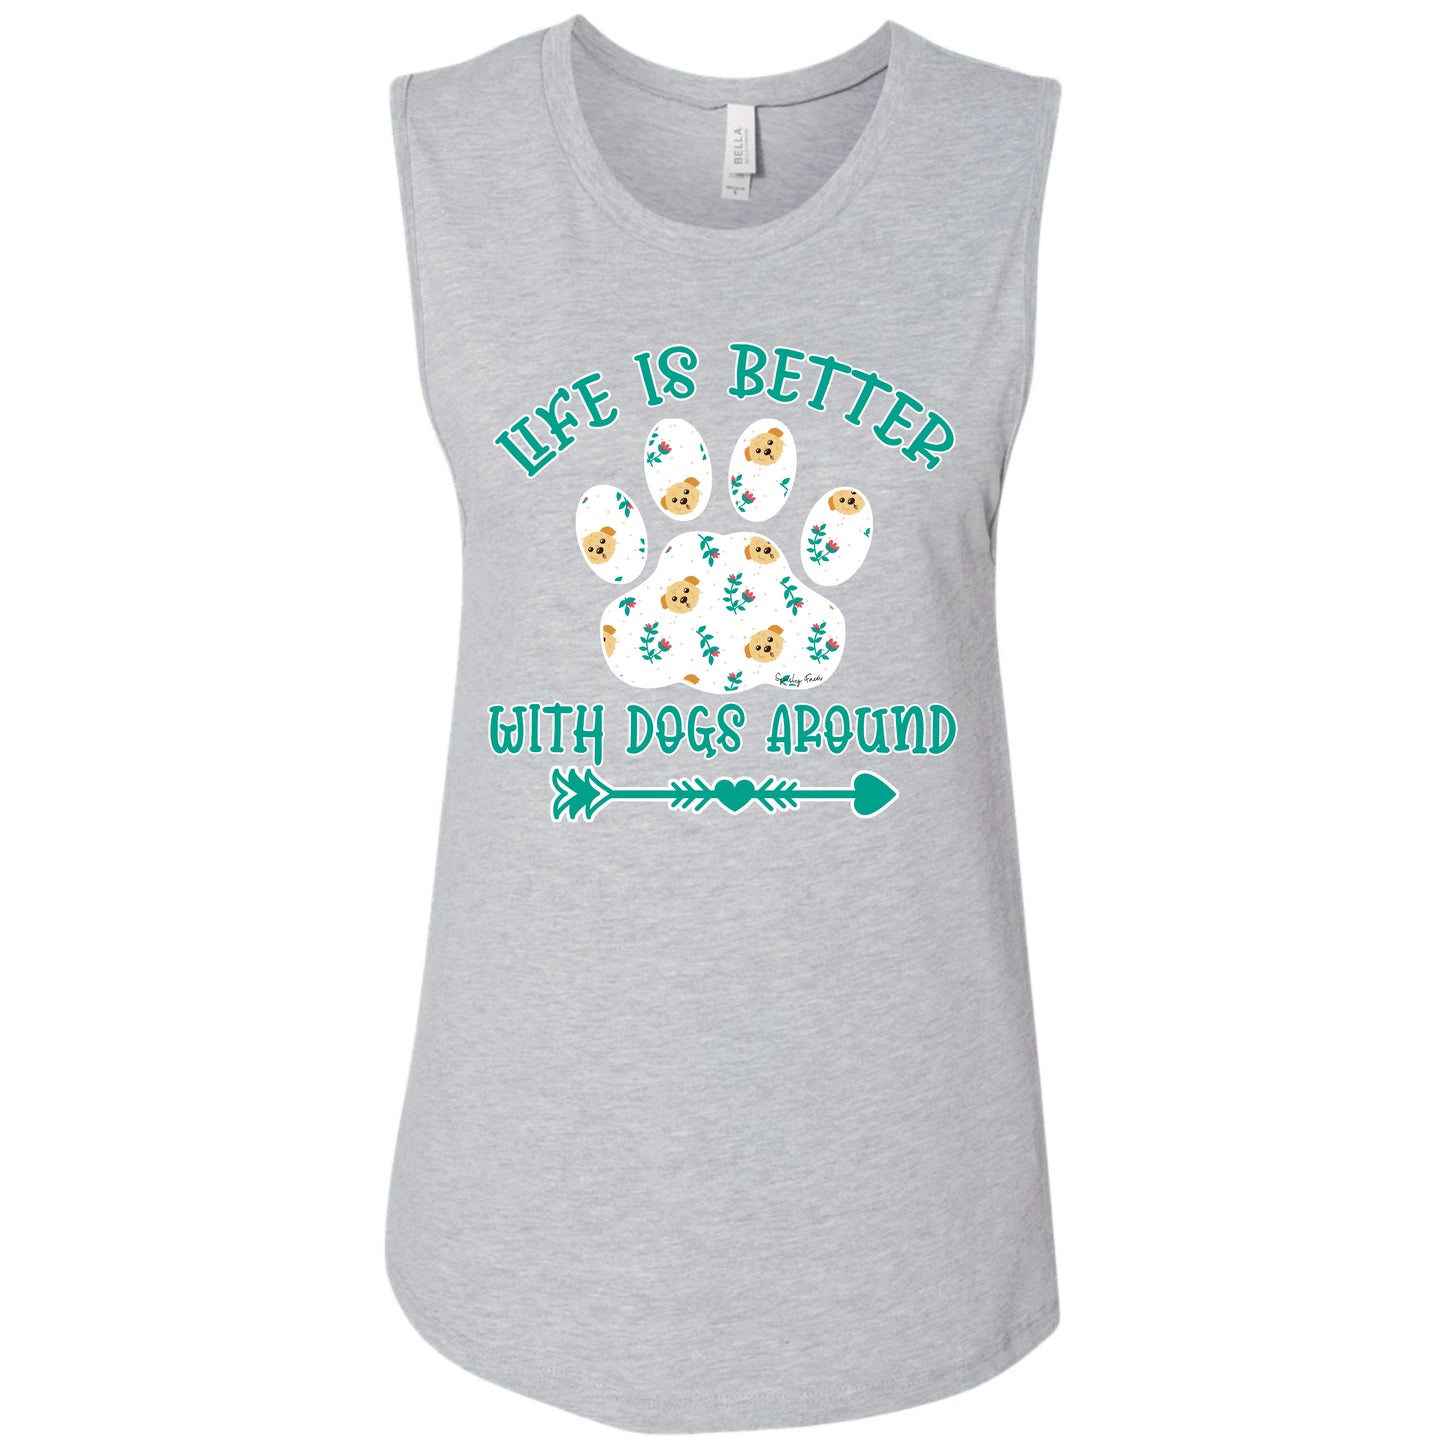 Life is better tank